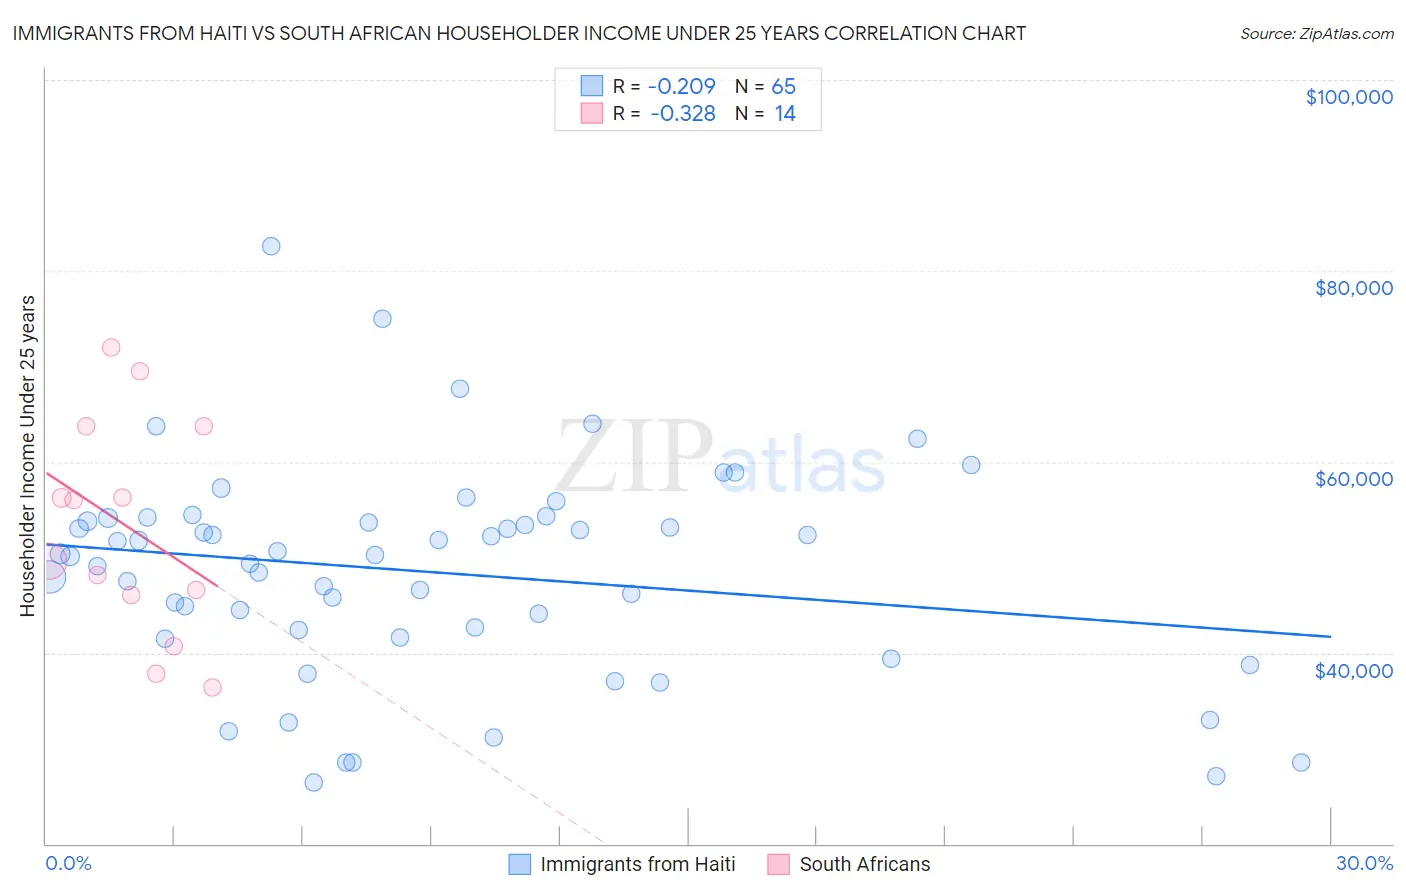 Immigrants from Haiti vs South African Householder Income Under 25 years